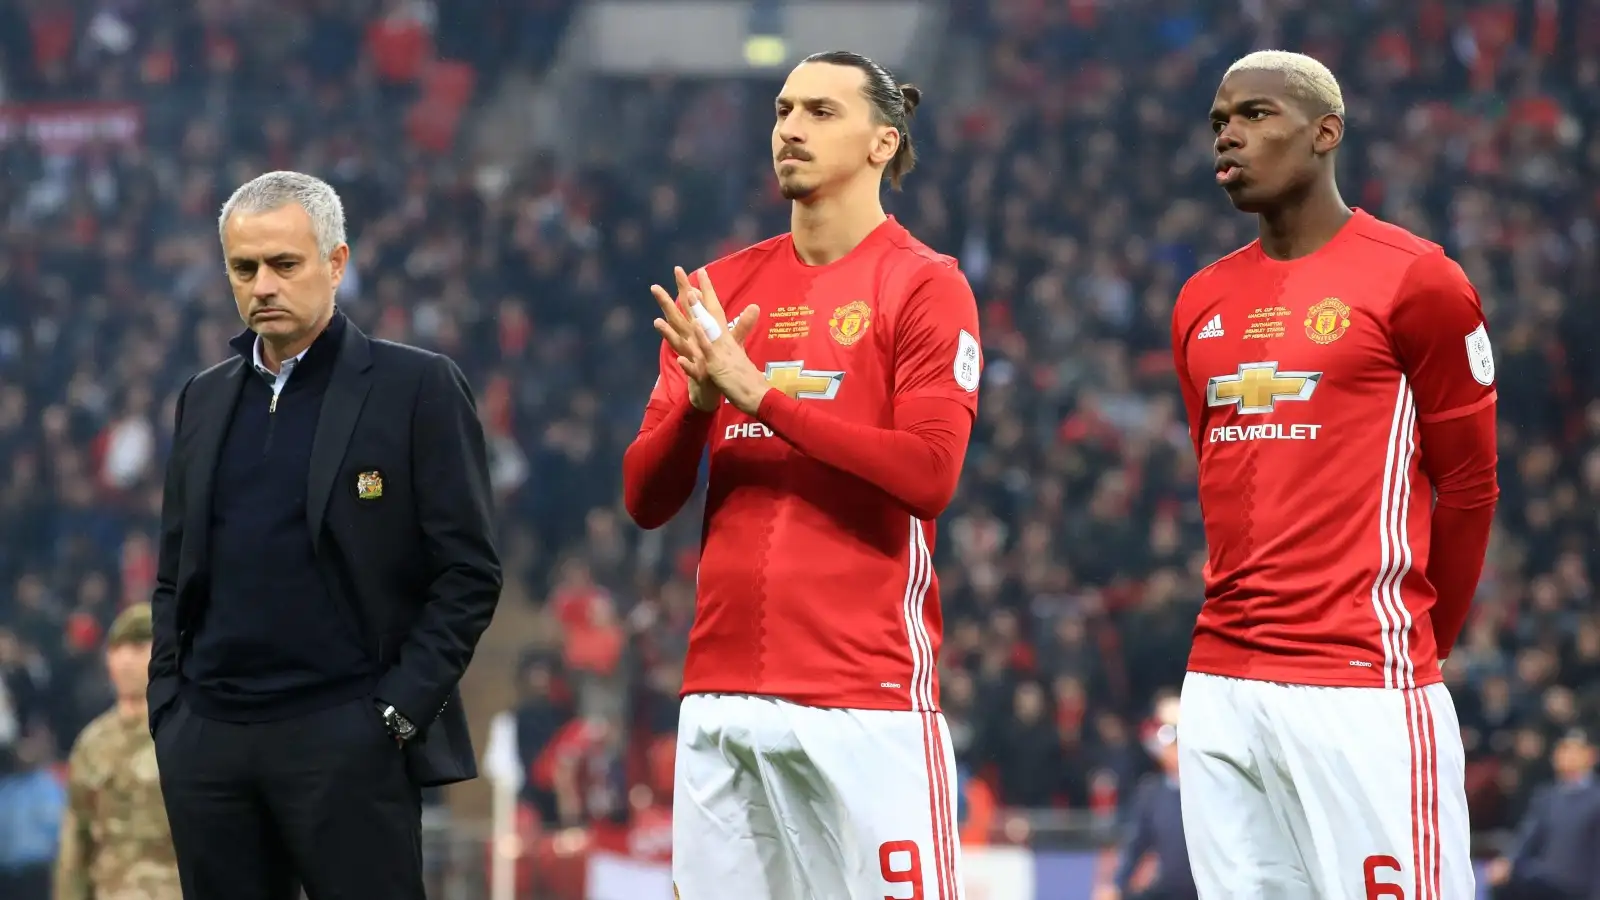 Manchester United manager Jose Mourinho stands alongside latan Ibrahimovic and Paul Pogba before the 2017 League Cup final.